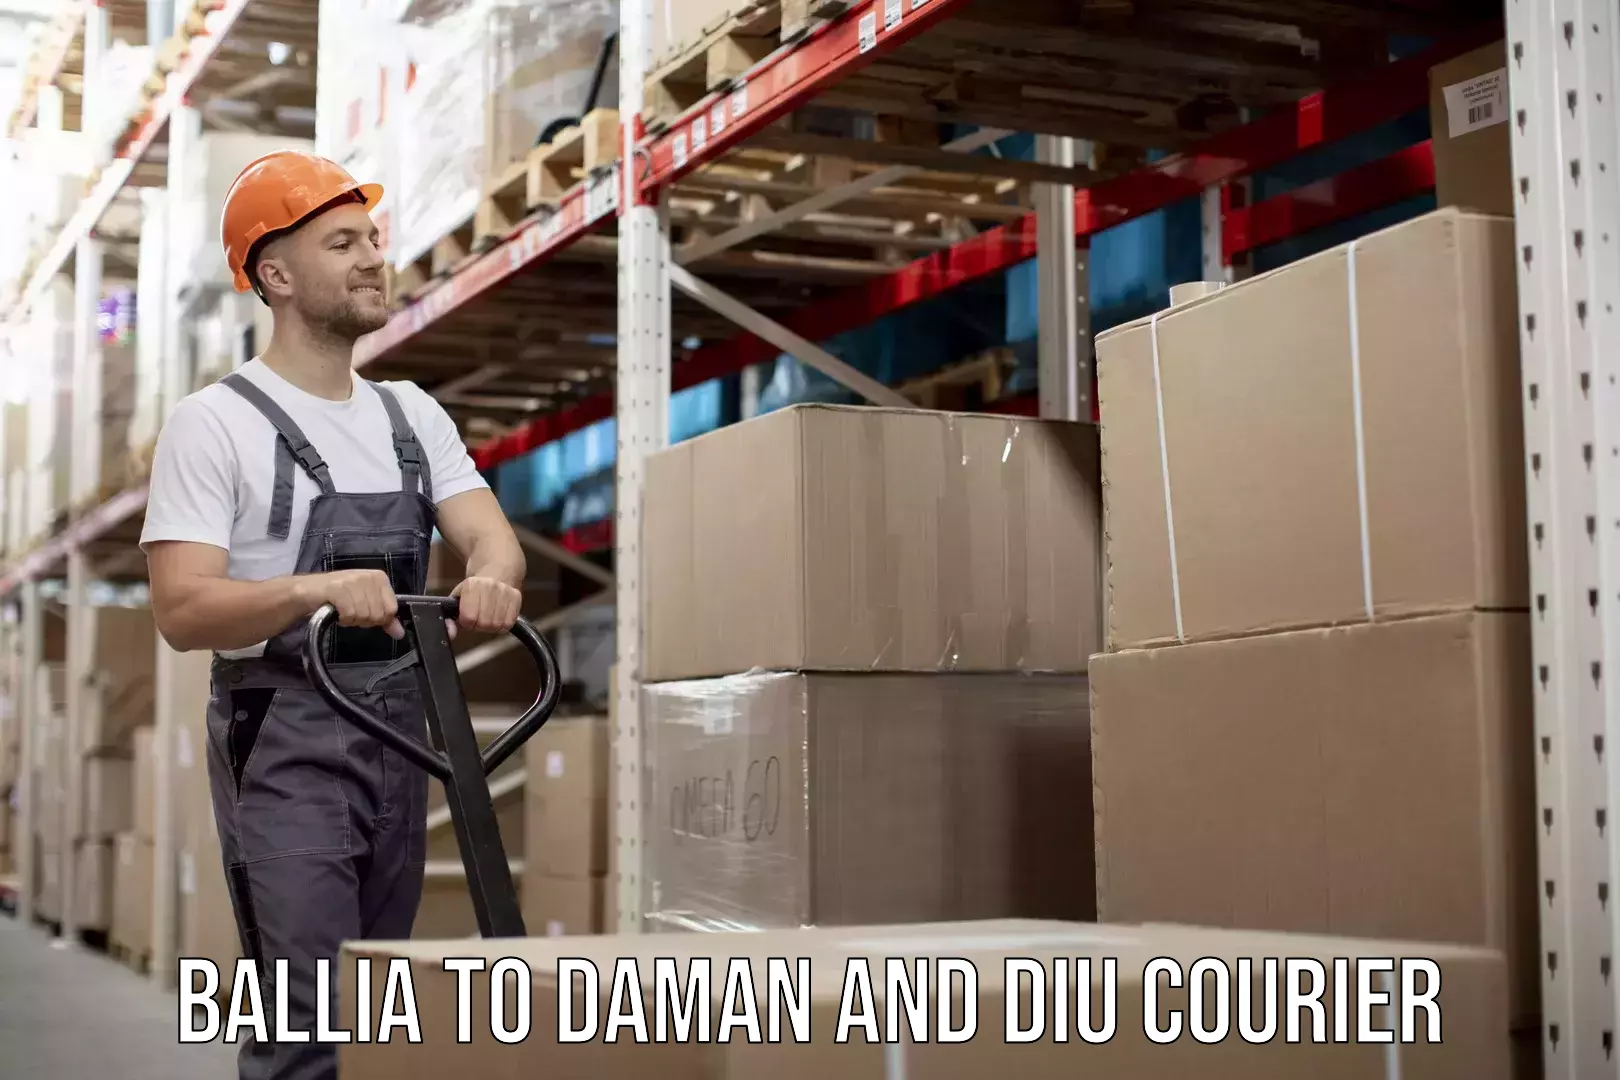 Multi-national courier services Ballia to Daman and Diu